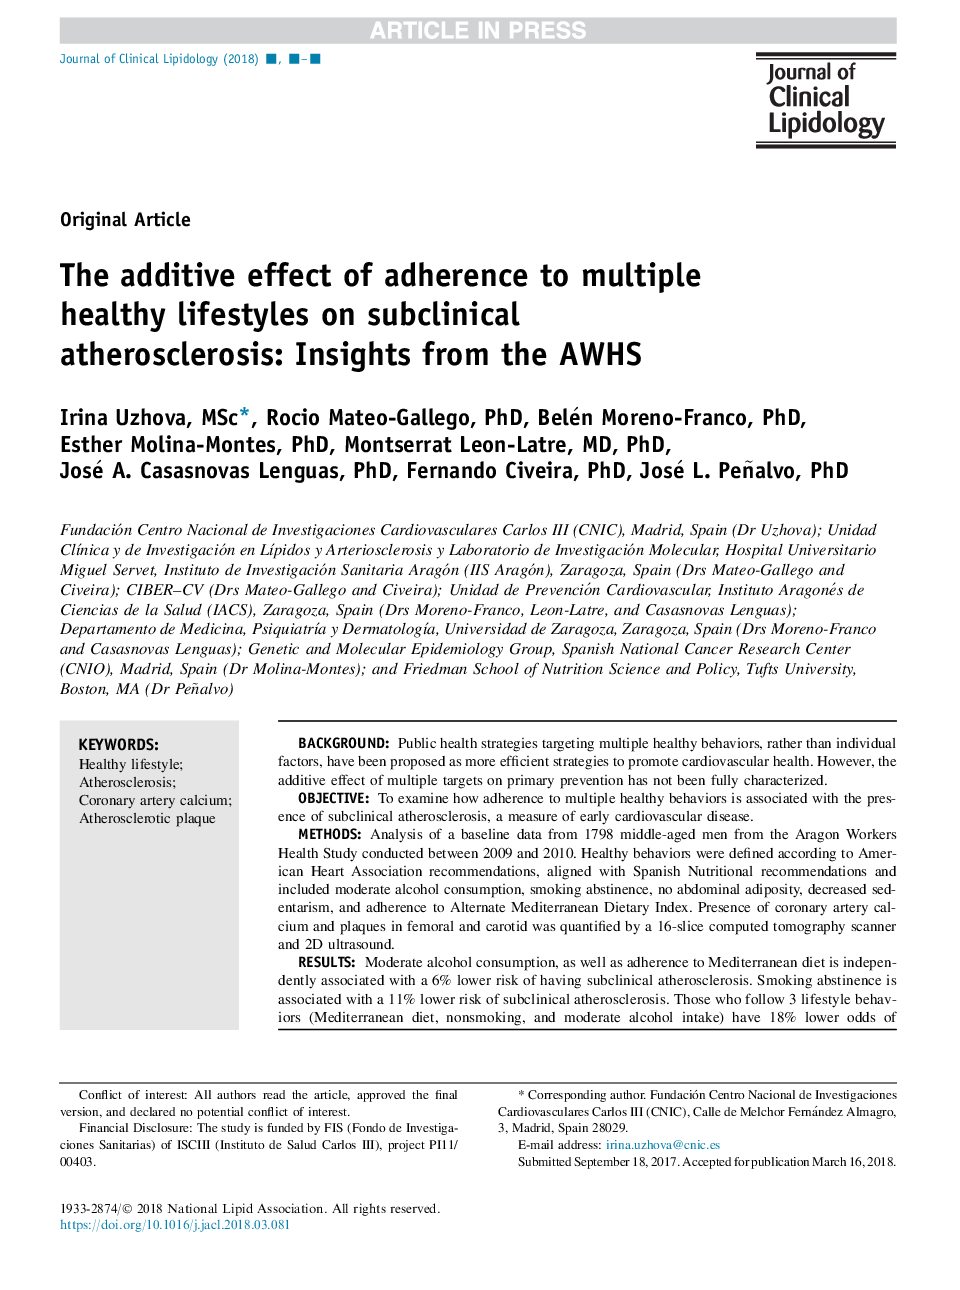 The additive effect of adherence to multiple healthy lifestyles on subclinical atherosclerosis: Insights from the AWHS